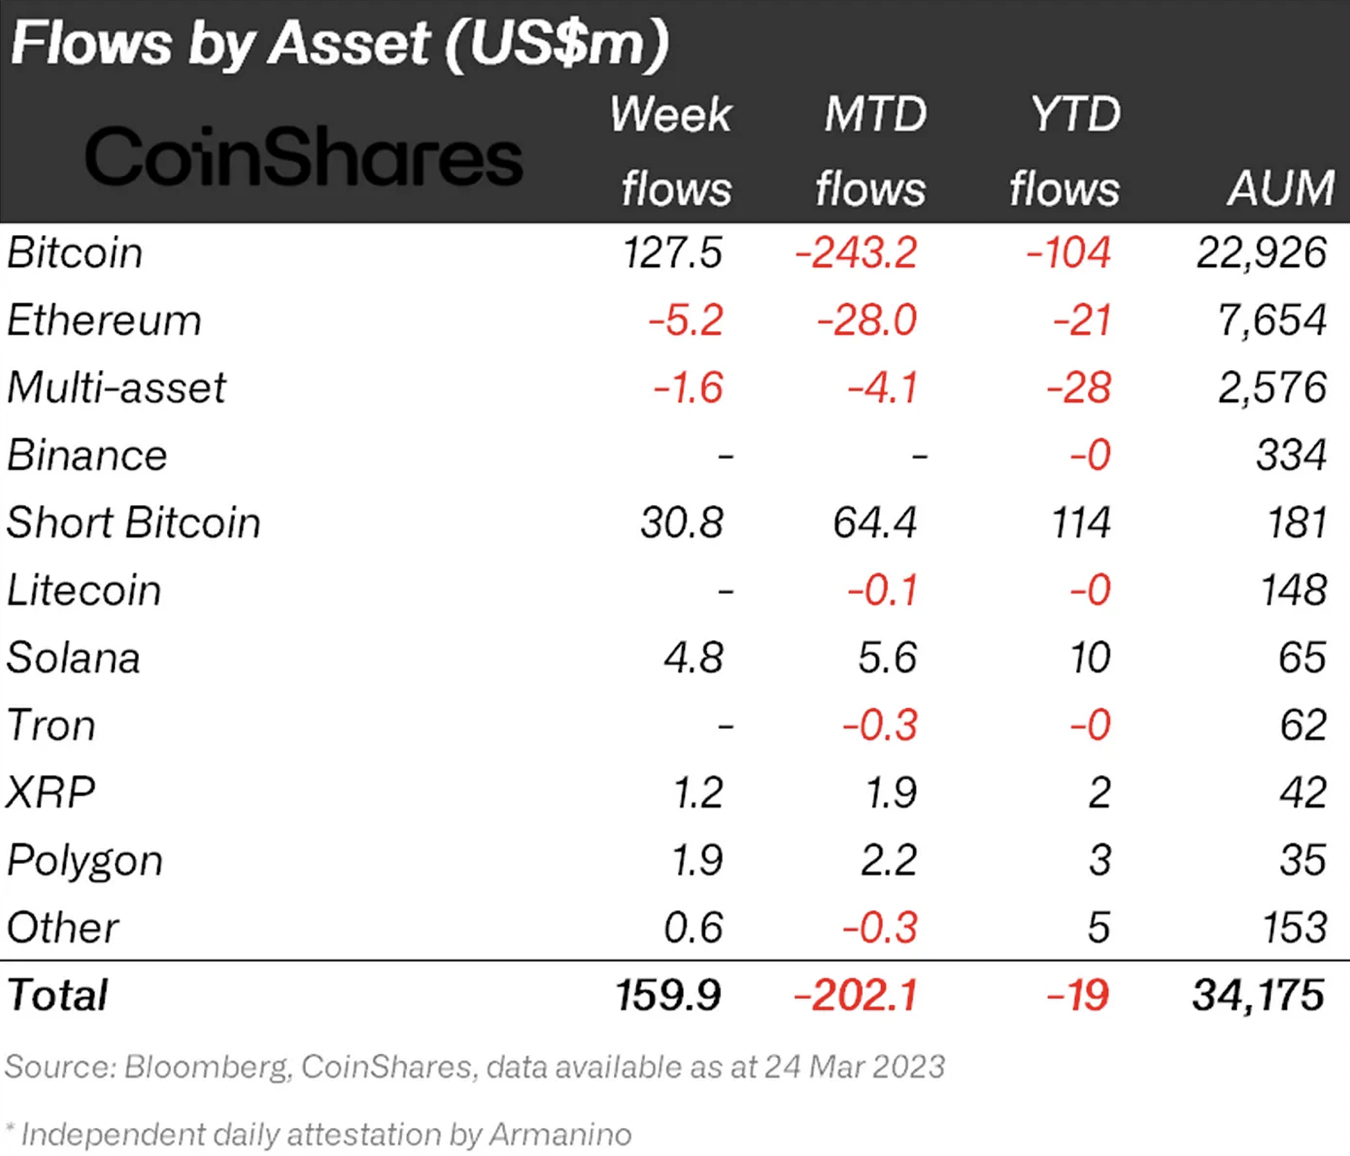 Asset weekly flows from CoinShares report